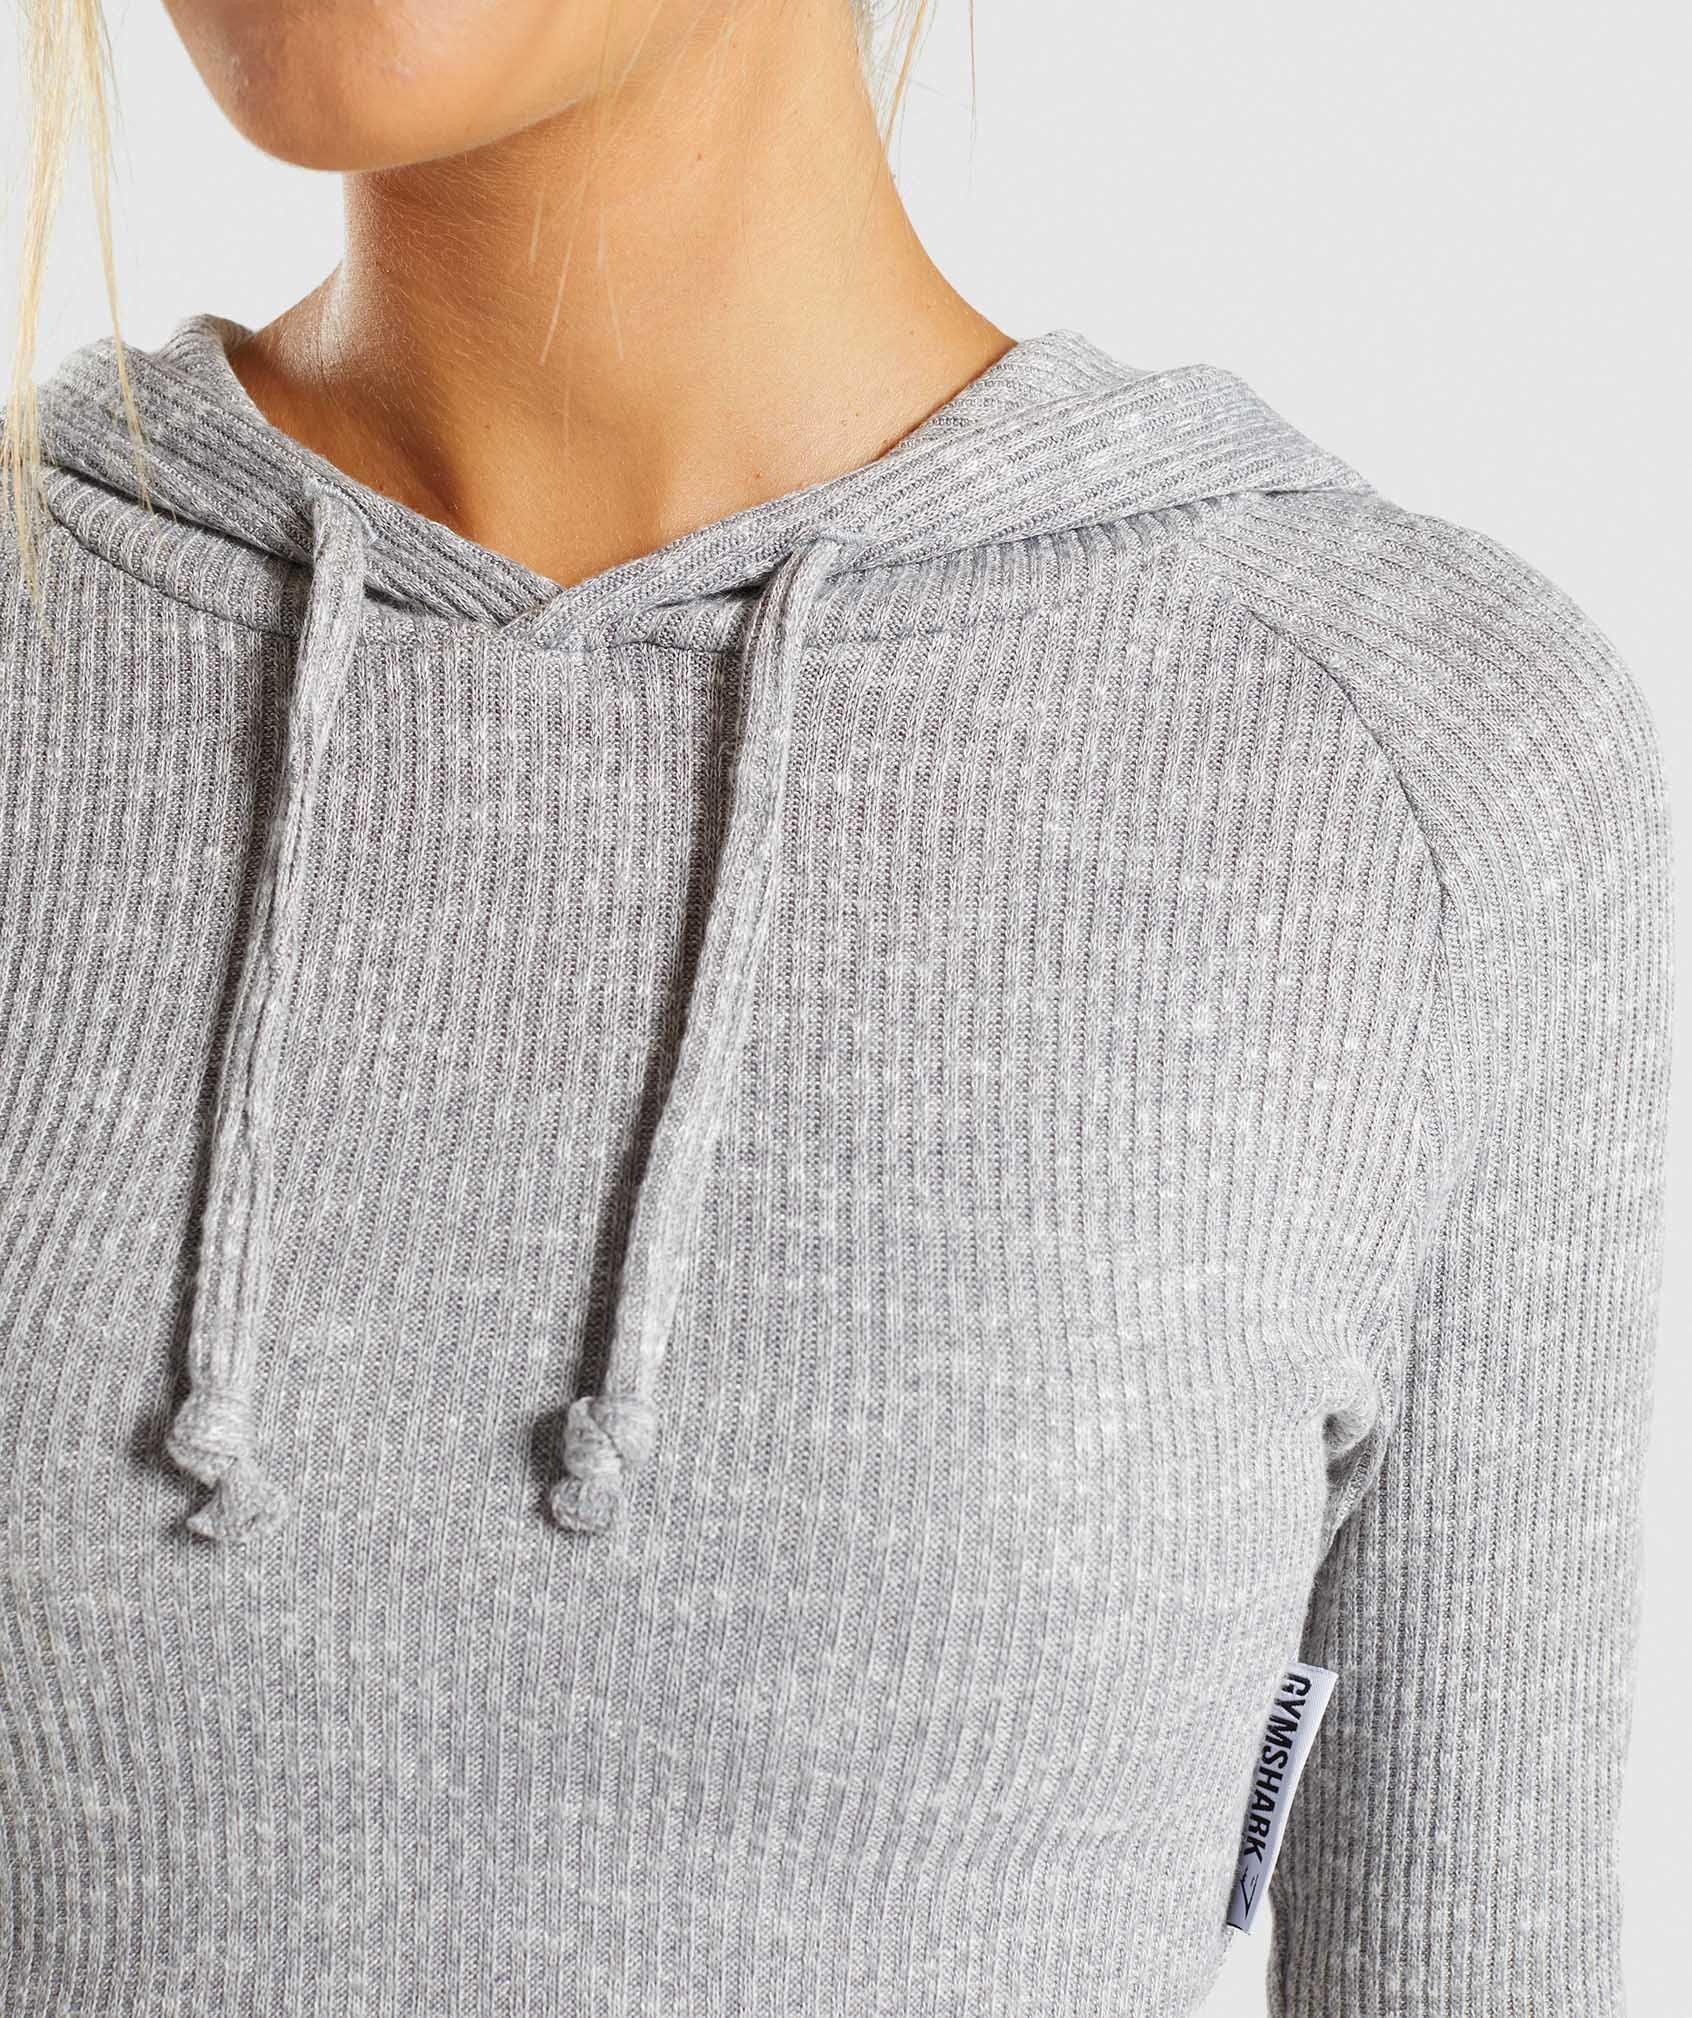 Slounge Cropped Hoodie in Light Grey Marl - view 6